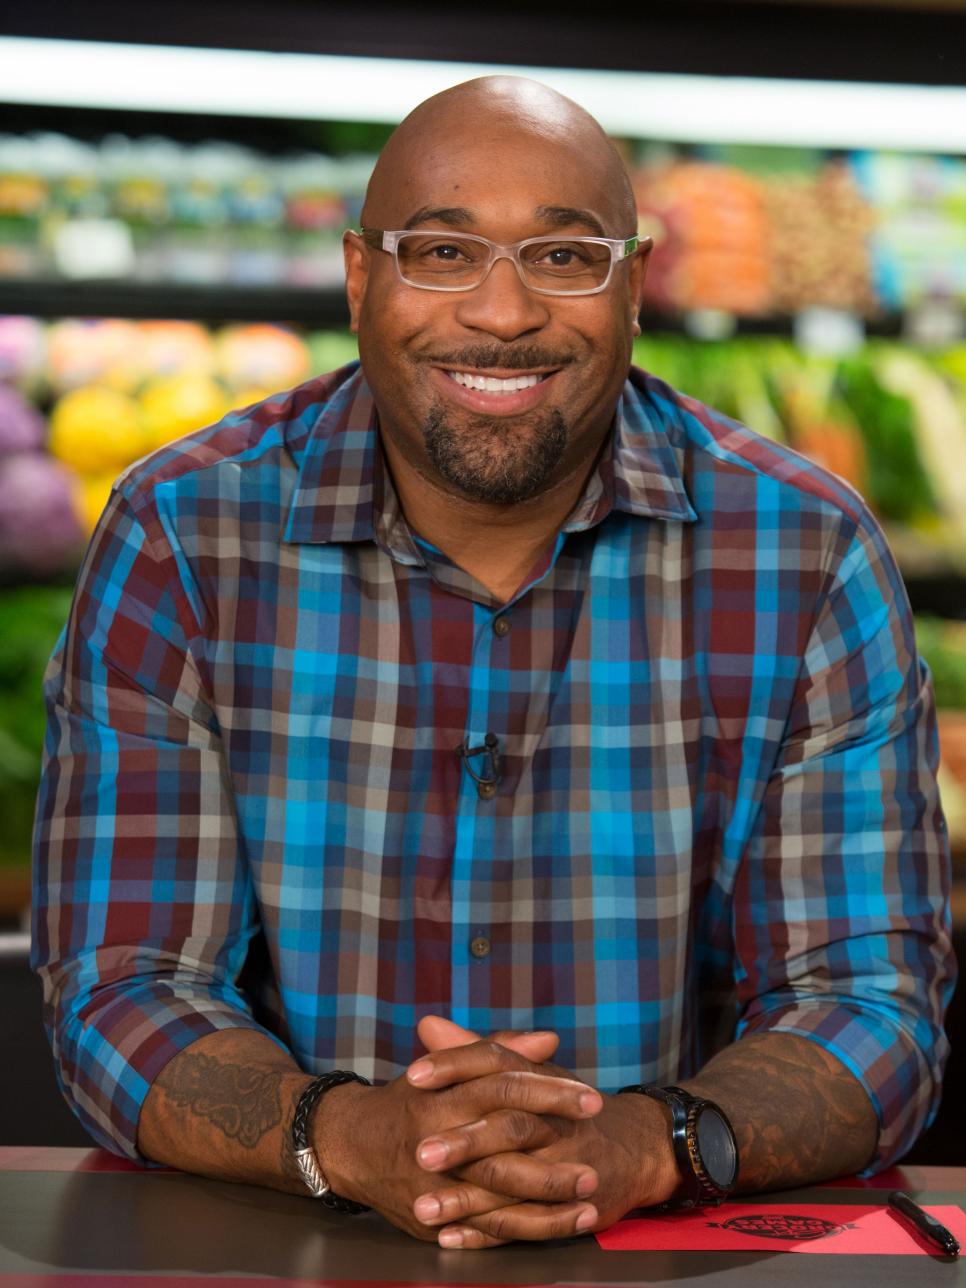 Meet the Judges of Guy's Grocery Games Guy's Grocery Games Food Network